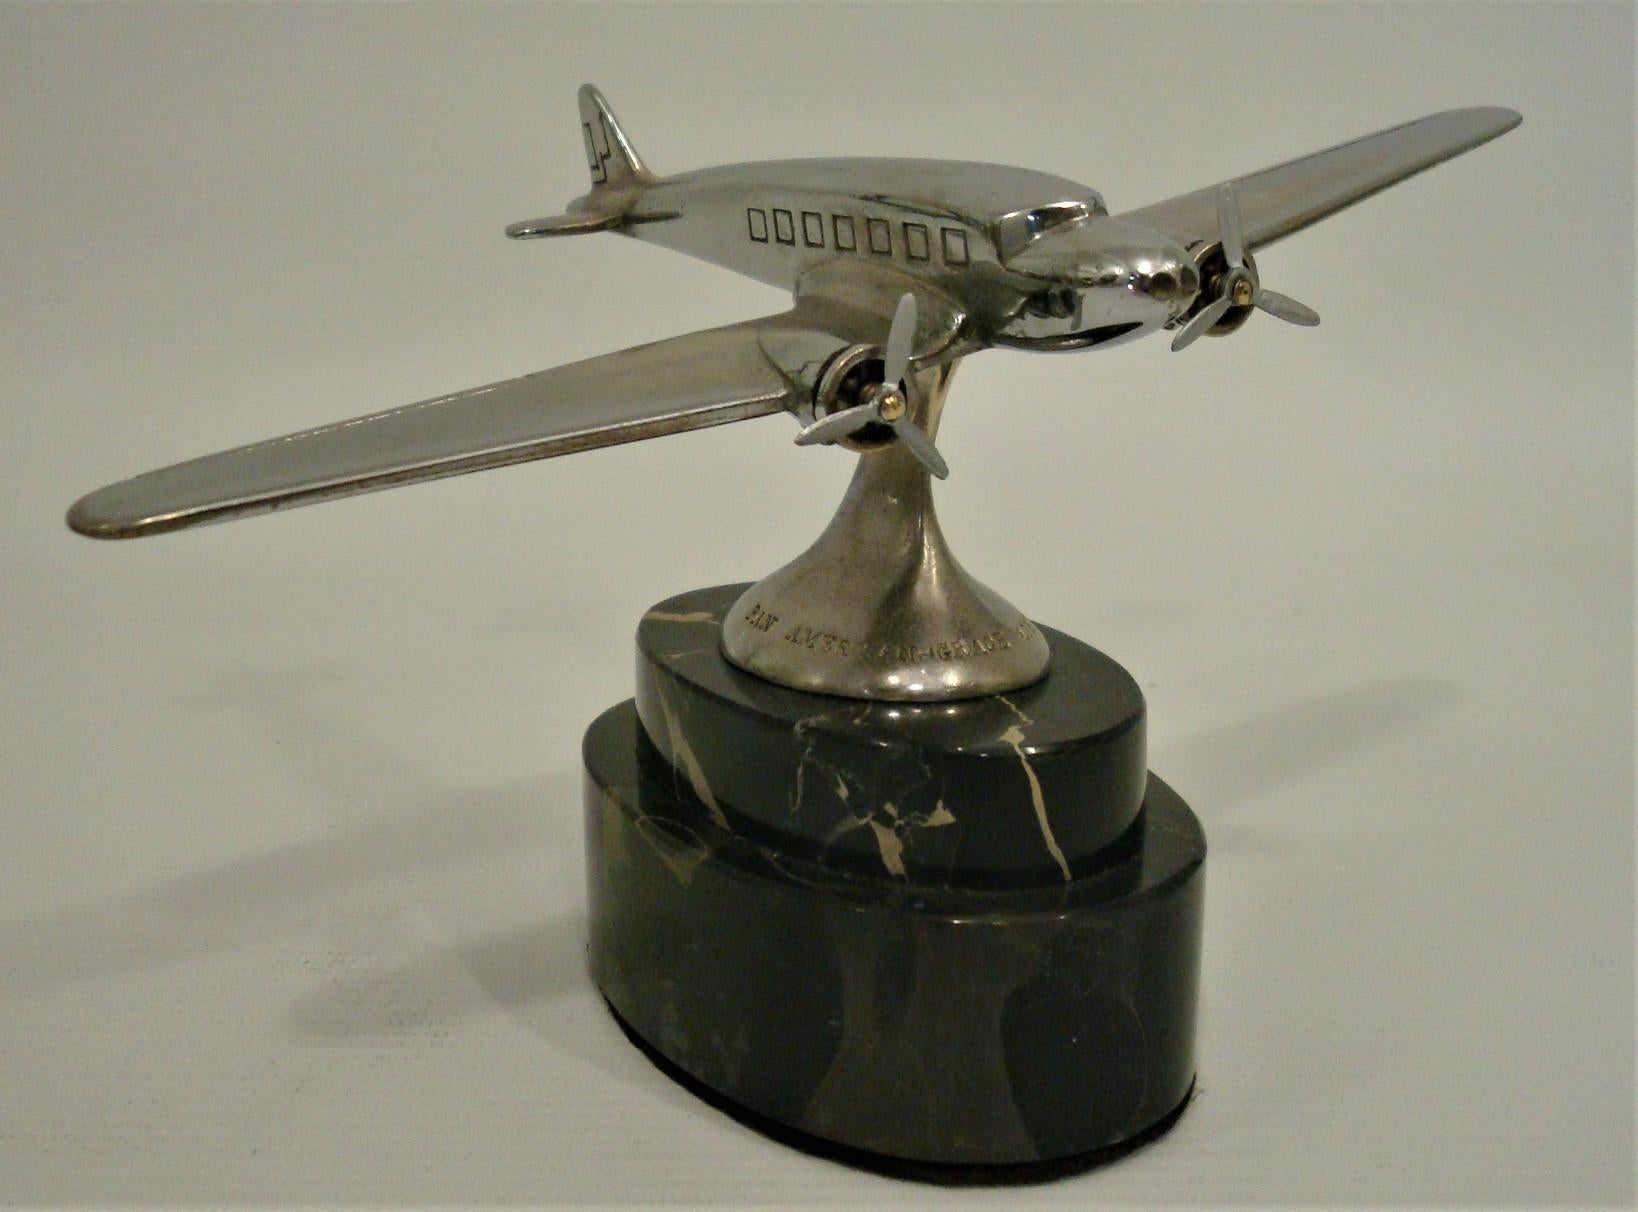 Pan American - Grace Airways Airplane Model Advertising Paperweight. 
circa 1930´s.

Pan American-Grace Airways, also known as Panagra, and dubbed 